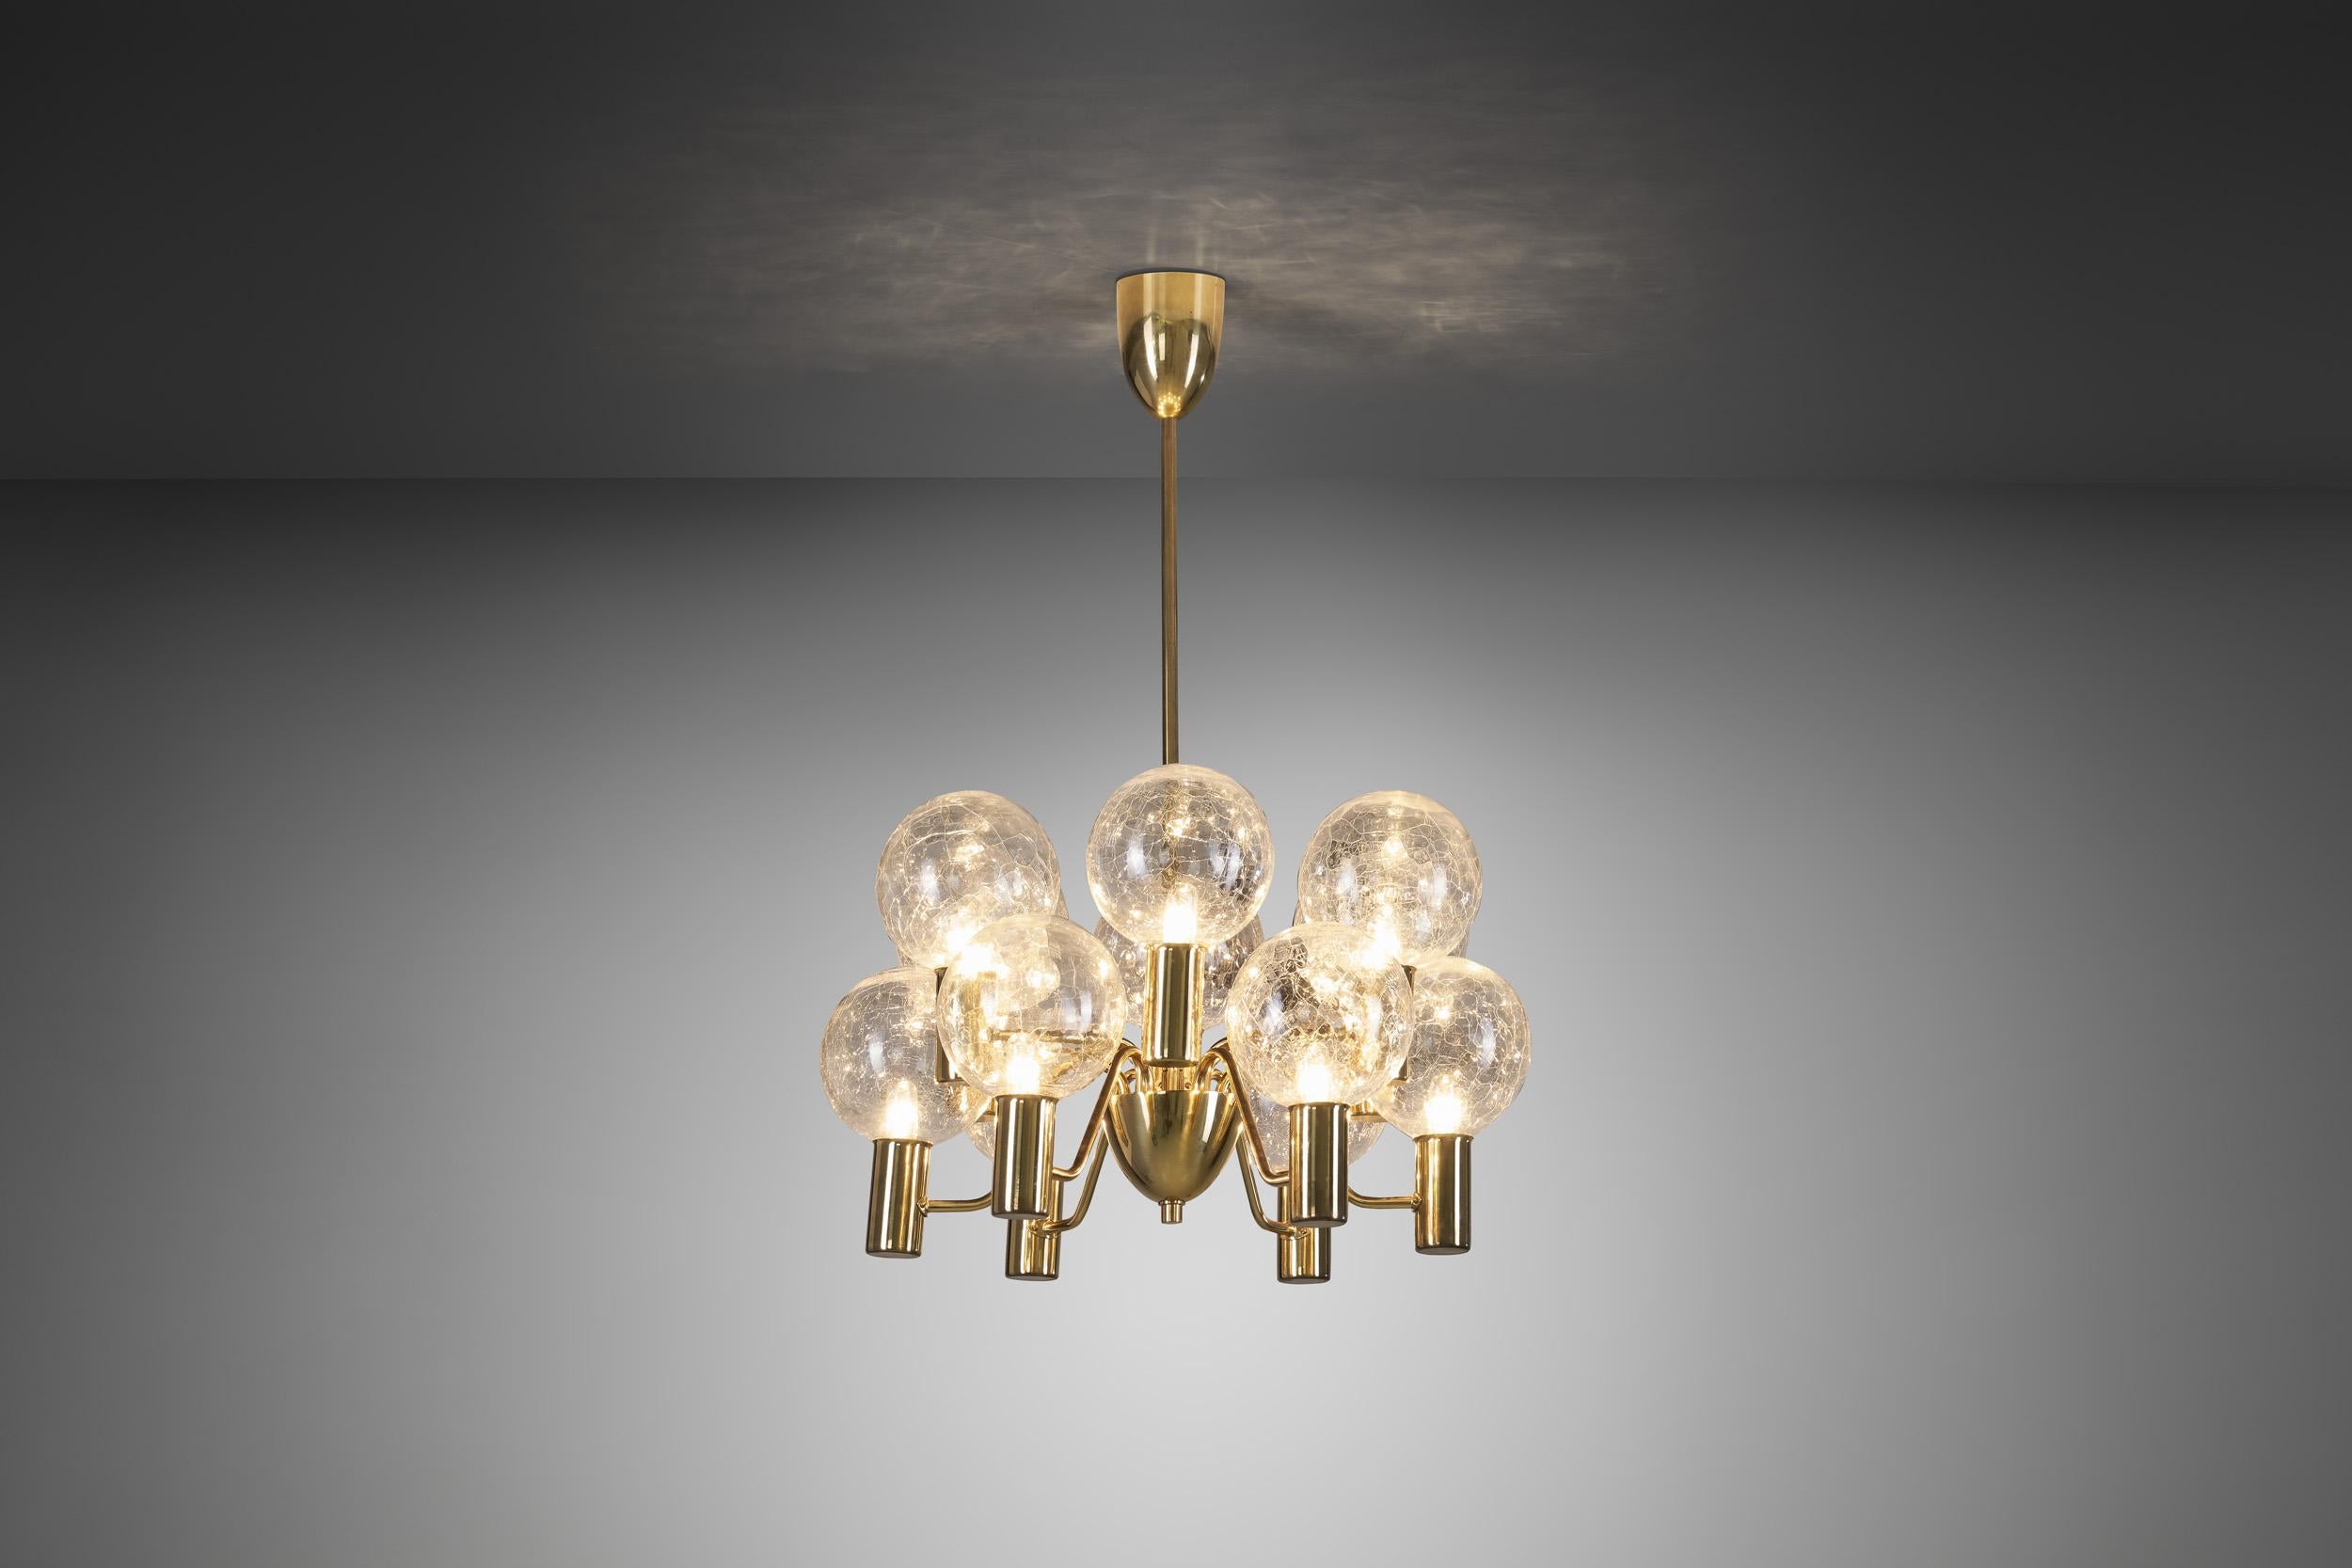 This marvellous, brass twelve-light chandelier was created in what we now call “the golden age of Scandinavian design”. Hans-Agne Jakobsson was the great Swedish master of lighting, designing some of the most recognizable mid-century modern lamps of